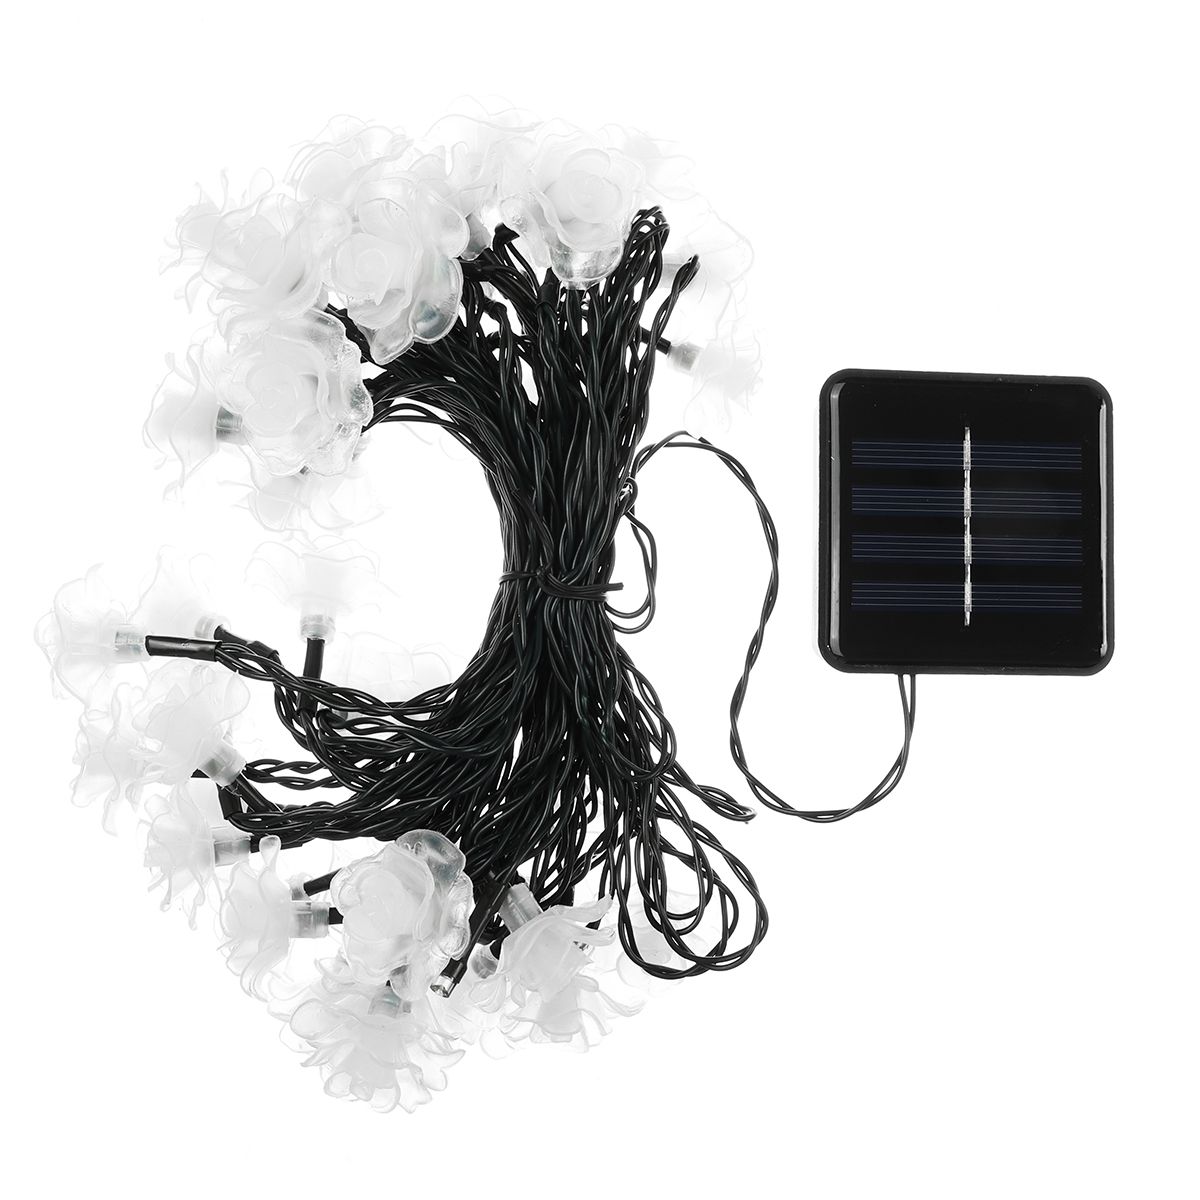 95M-50LED-Solar-String-Lights-Waterproof-Christmas-Party-Garden-Home-Decor-1764183